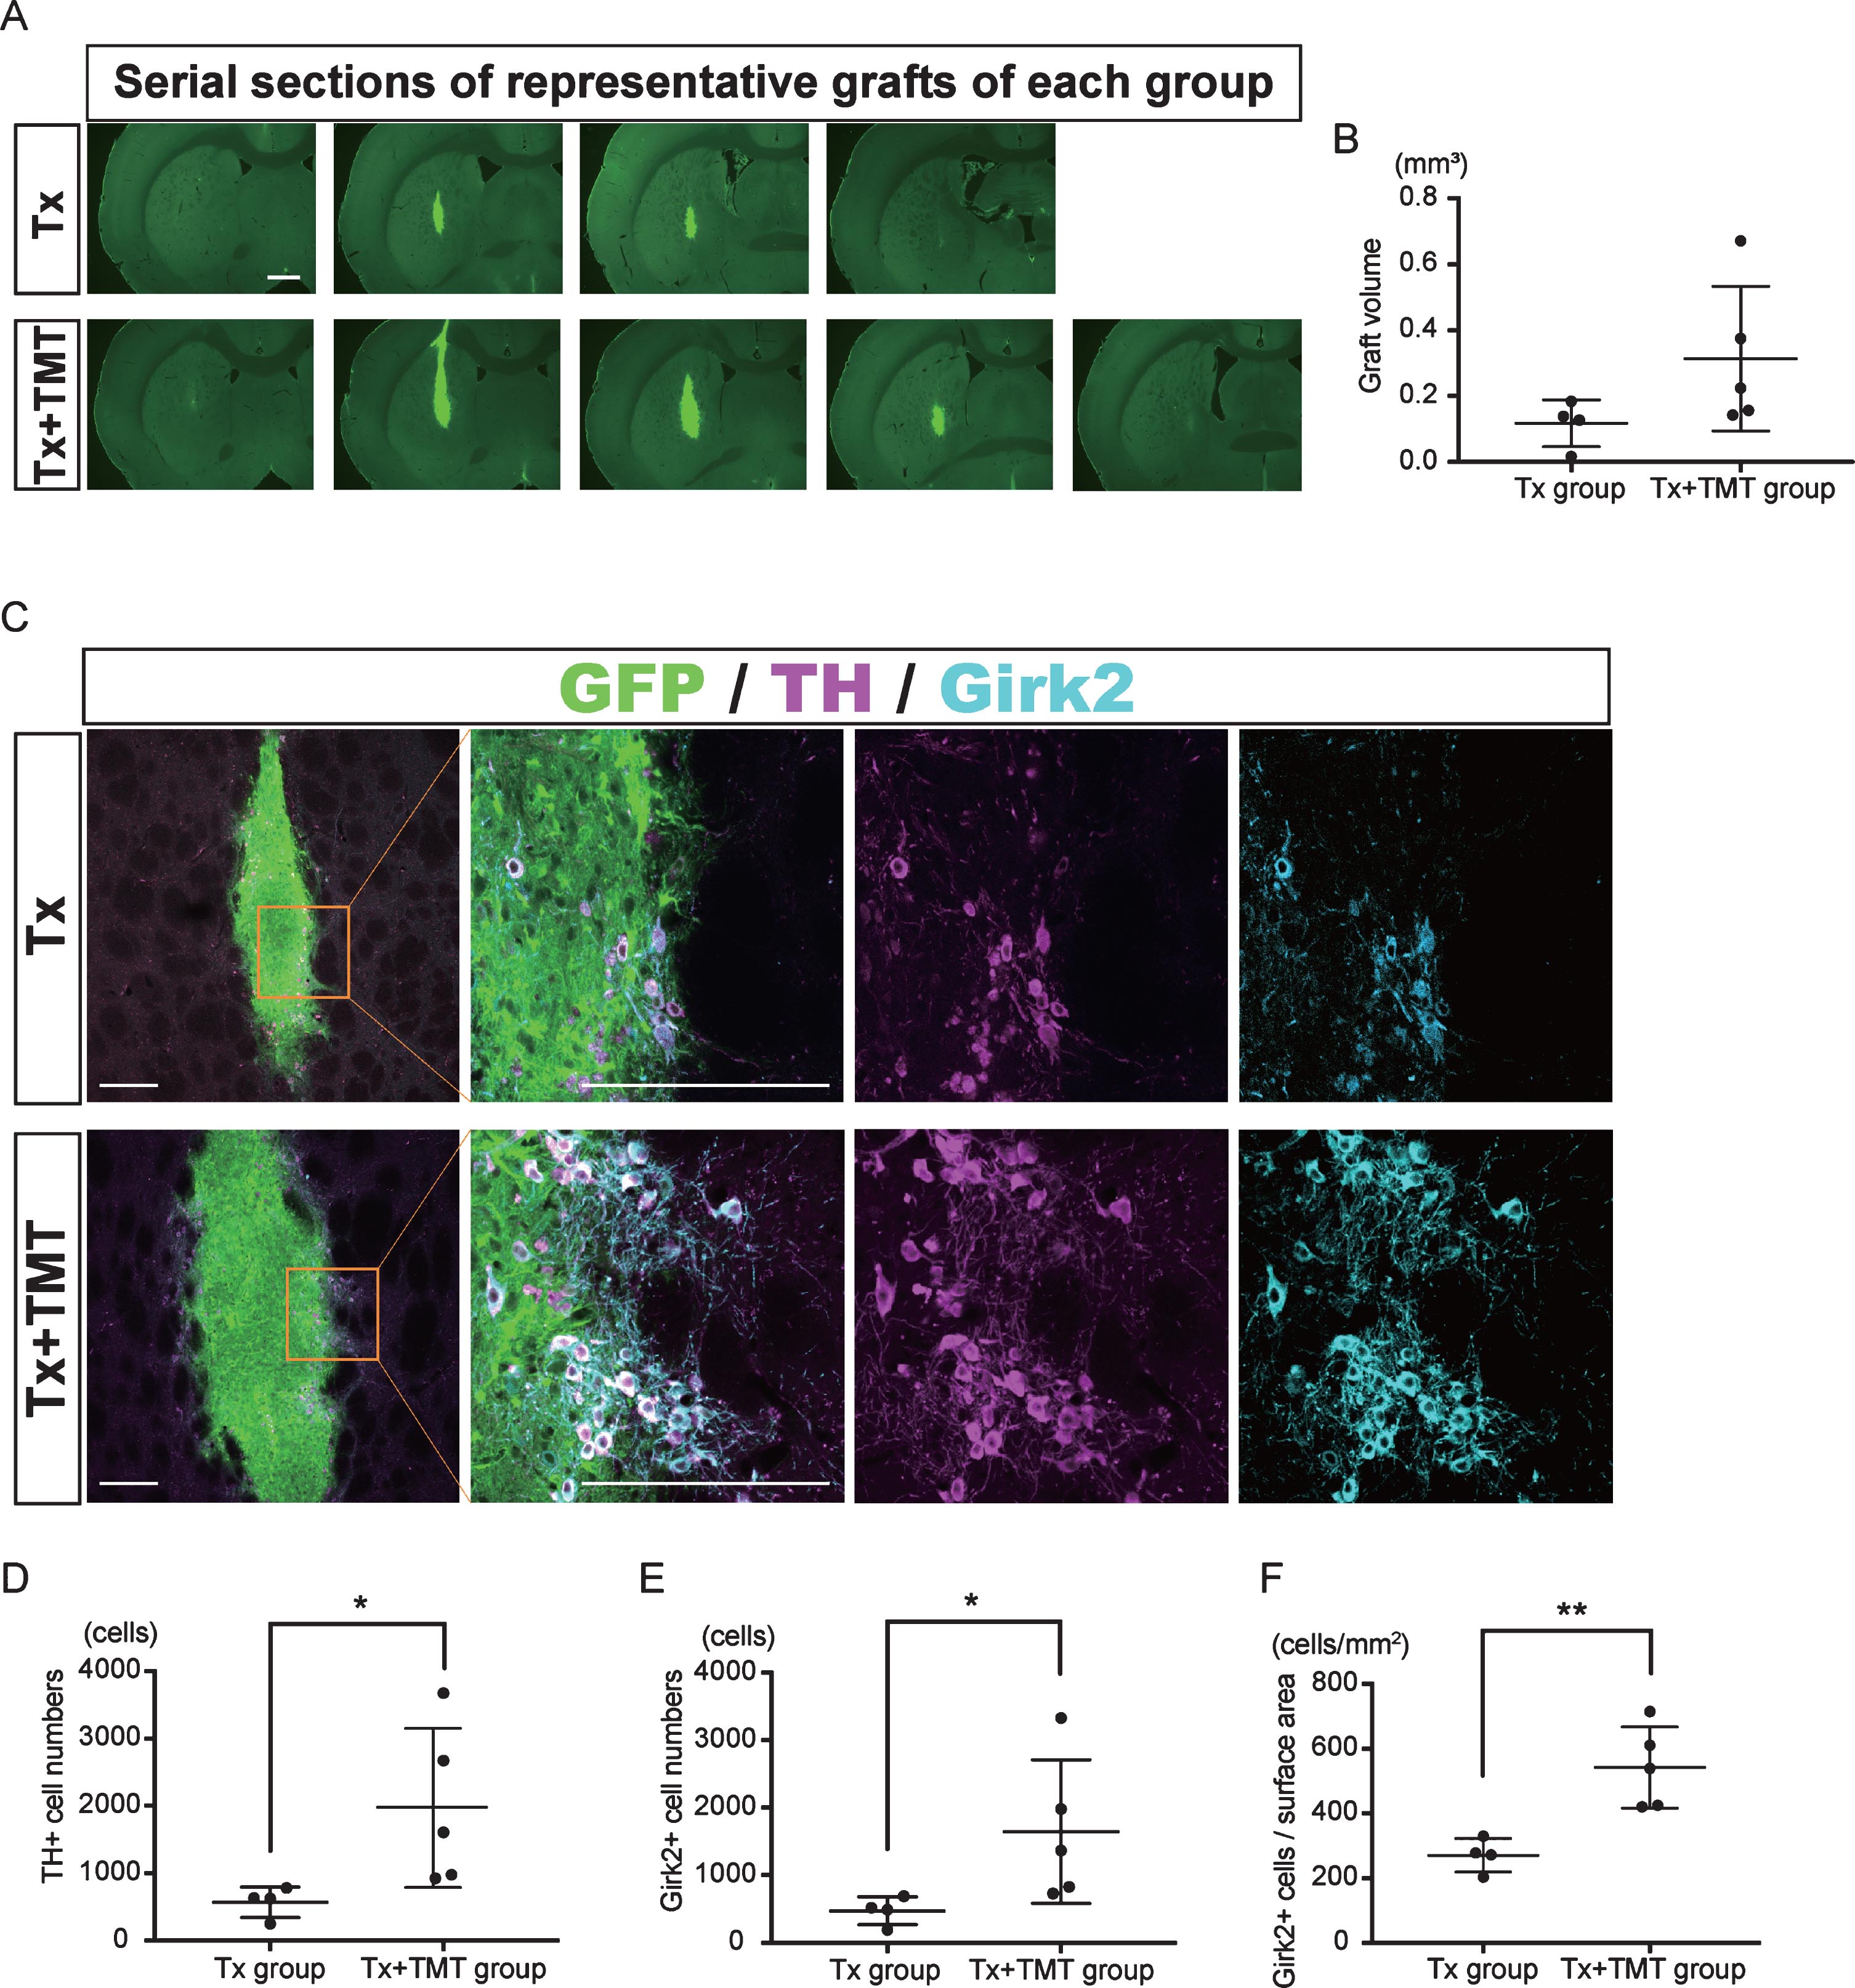 Exercise increased the number of dopamine neurons in the graft. (A) Serial sections of representative grafts at 6 weeks after transplantation in Tx and Tx+TMT rats. The grafts were identified with the expression of GFP. (B) Quantification of the graft volume from the Tx group (N = 4) and Tx+TMT group (N = 5). (C) Immunofluorescence images of the grafts. (D, E and F) Quantification of TH+ (D) and Girk2+ (E, F) cells in the grafts. The number of TH-positive cells was significantly larger in the Tx+TMT group (D). More Girk2-positive cells survived in the Tx+TMT group, both in total number (E) and in number adjusted by the surface area of the graft (cells/cm2, F). *p = 0.016 by Mann-Whitney test, **p = 0.005 by Unpaired t test. All values are expressed as the mean±SD (B, D, E and F). Scale bars: 1 mm (A), 200 μm (C).